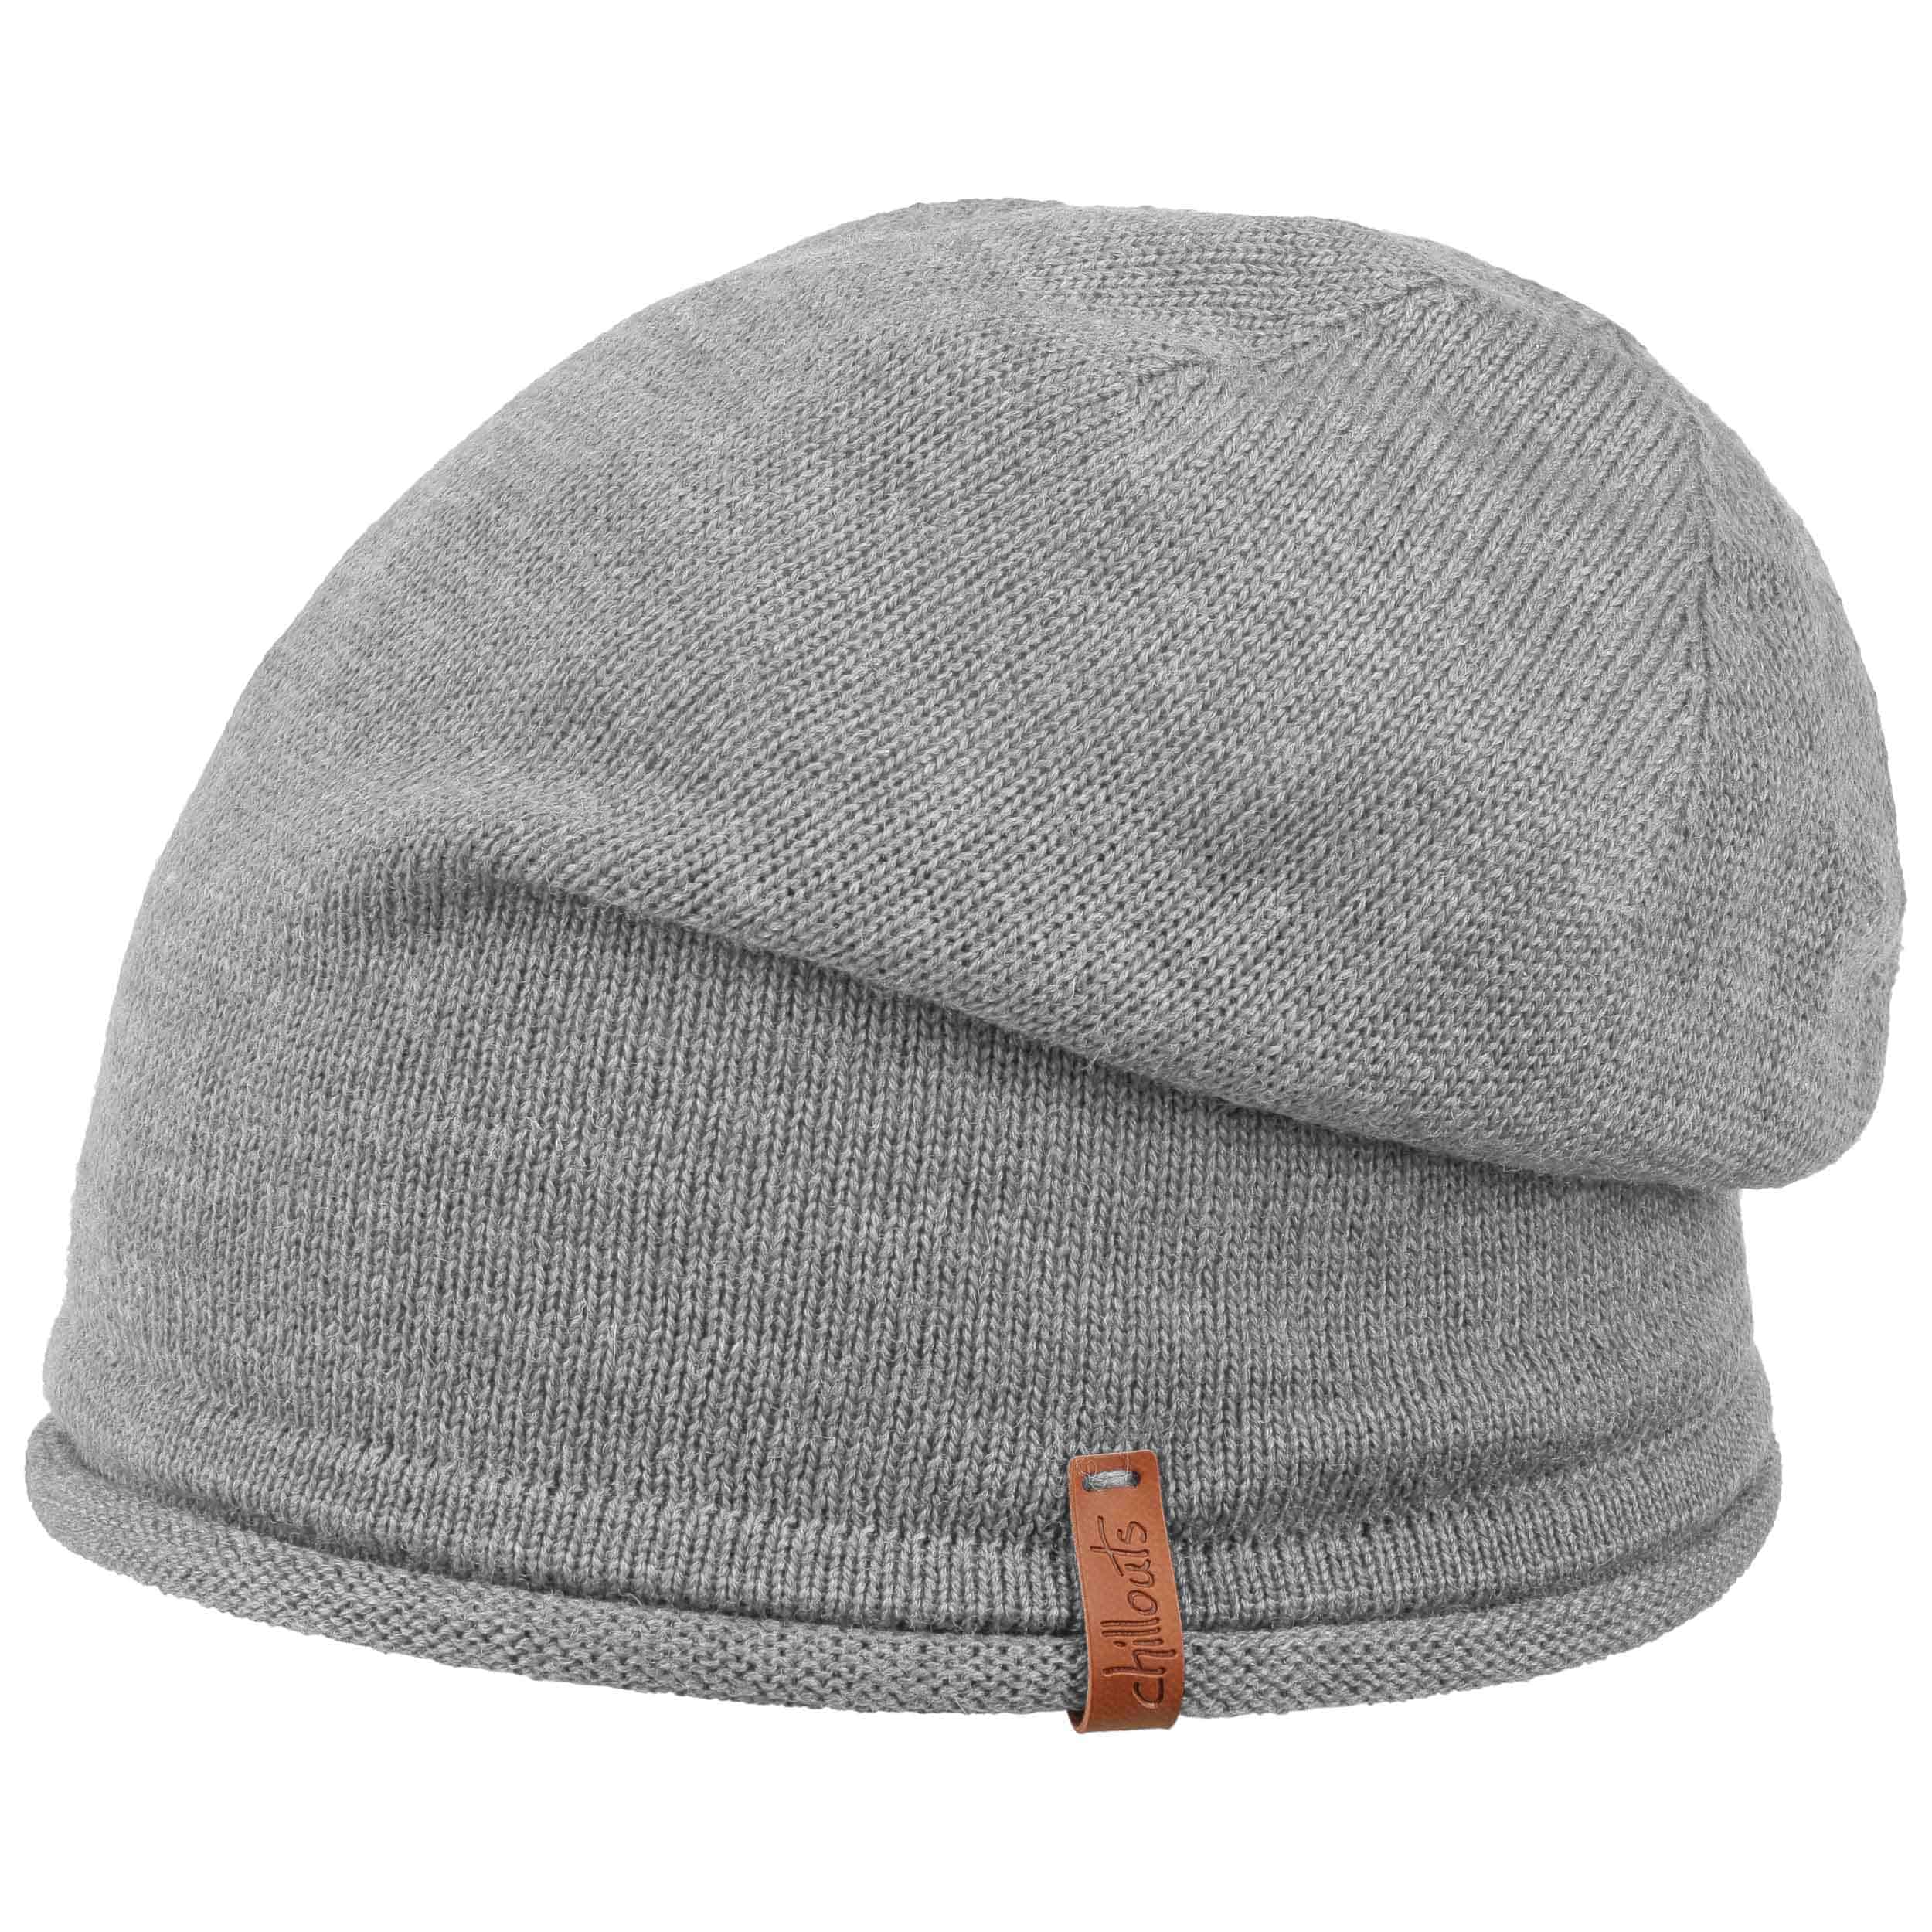 Leicester Oversize Beanie by Chillouts € 29,95 